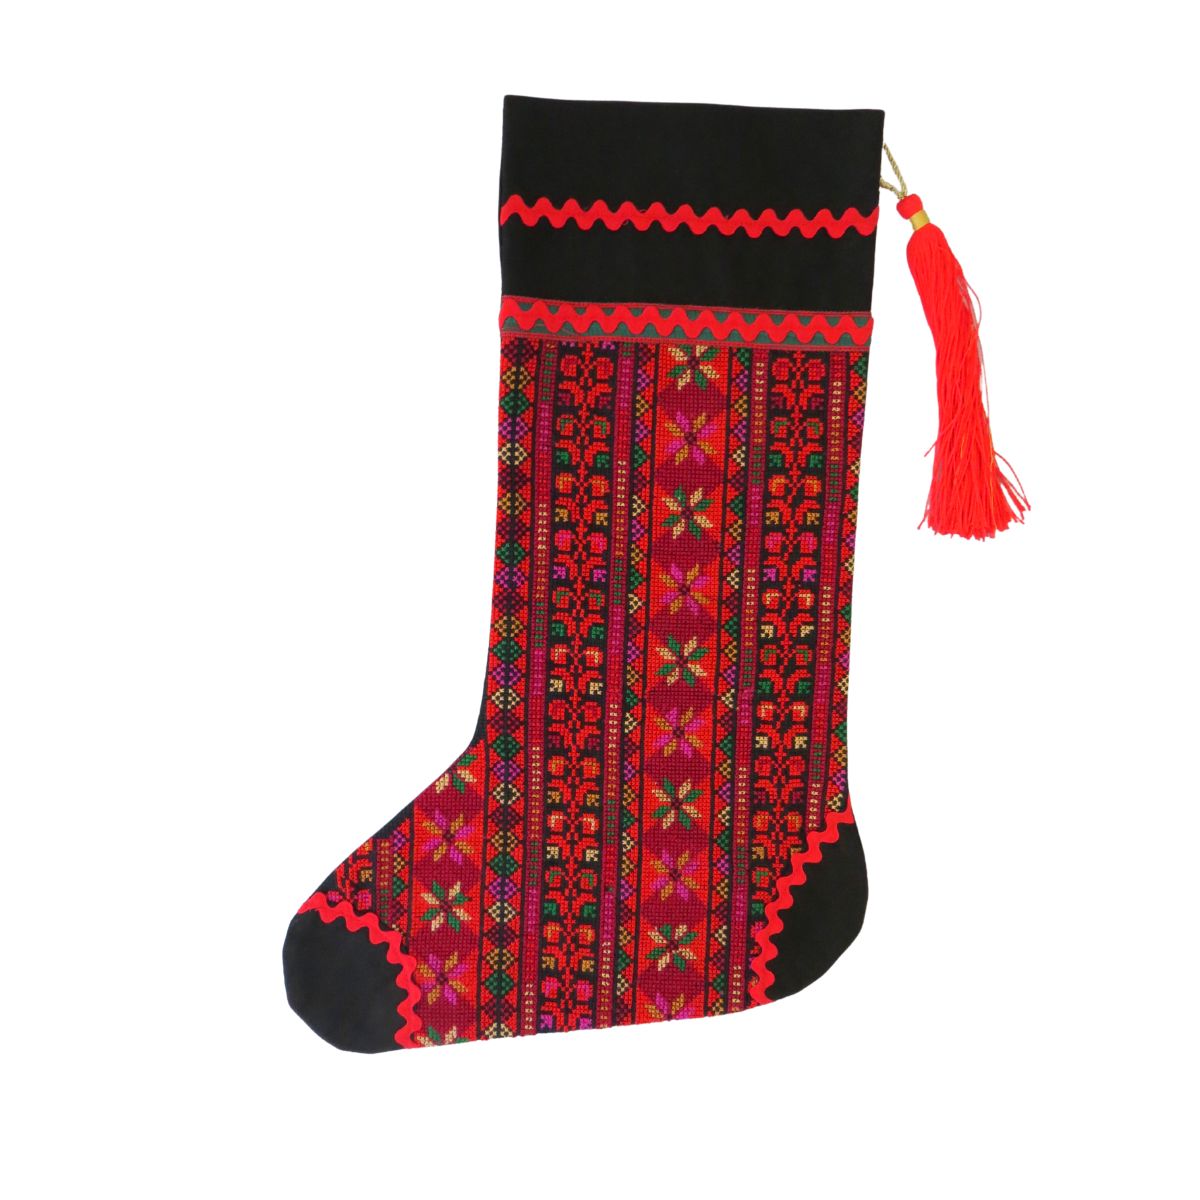 Embroidered Christmas Stocking from Gaza